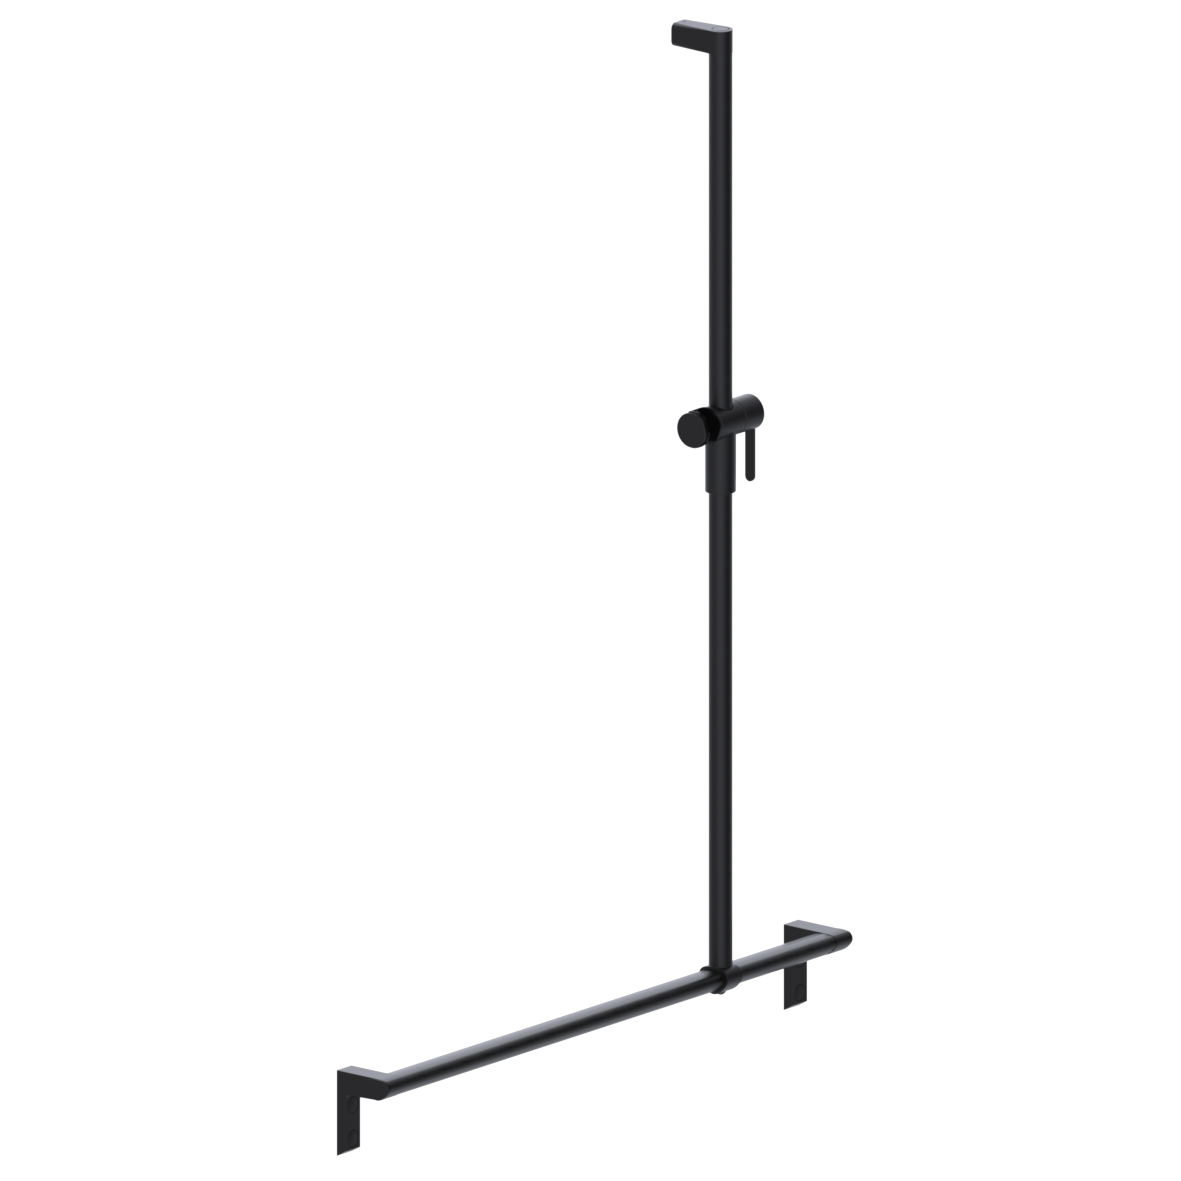 Cavere Care Shower handrail, with movable shower handrail, left and right, 900 x 1200 mm, Cavere Carbon black